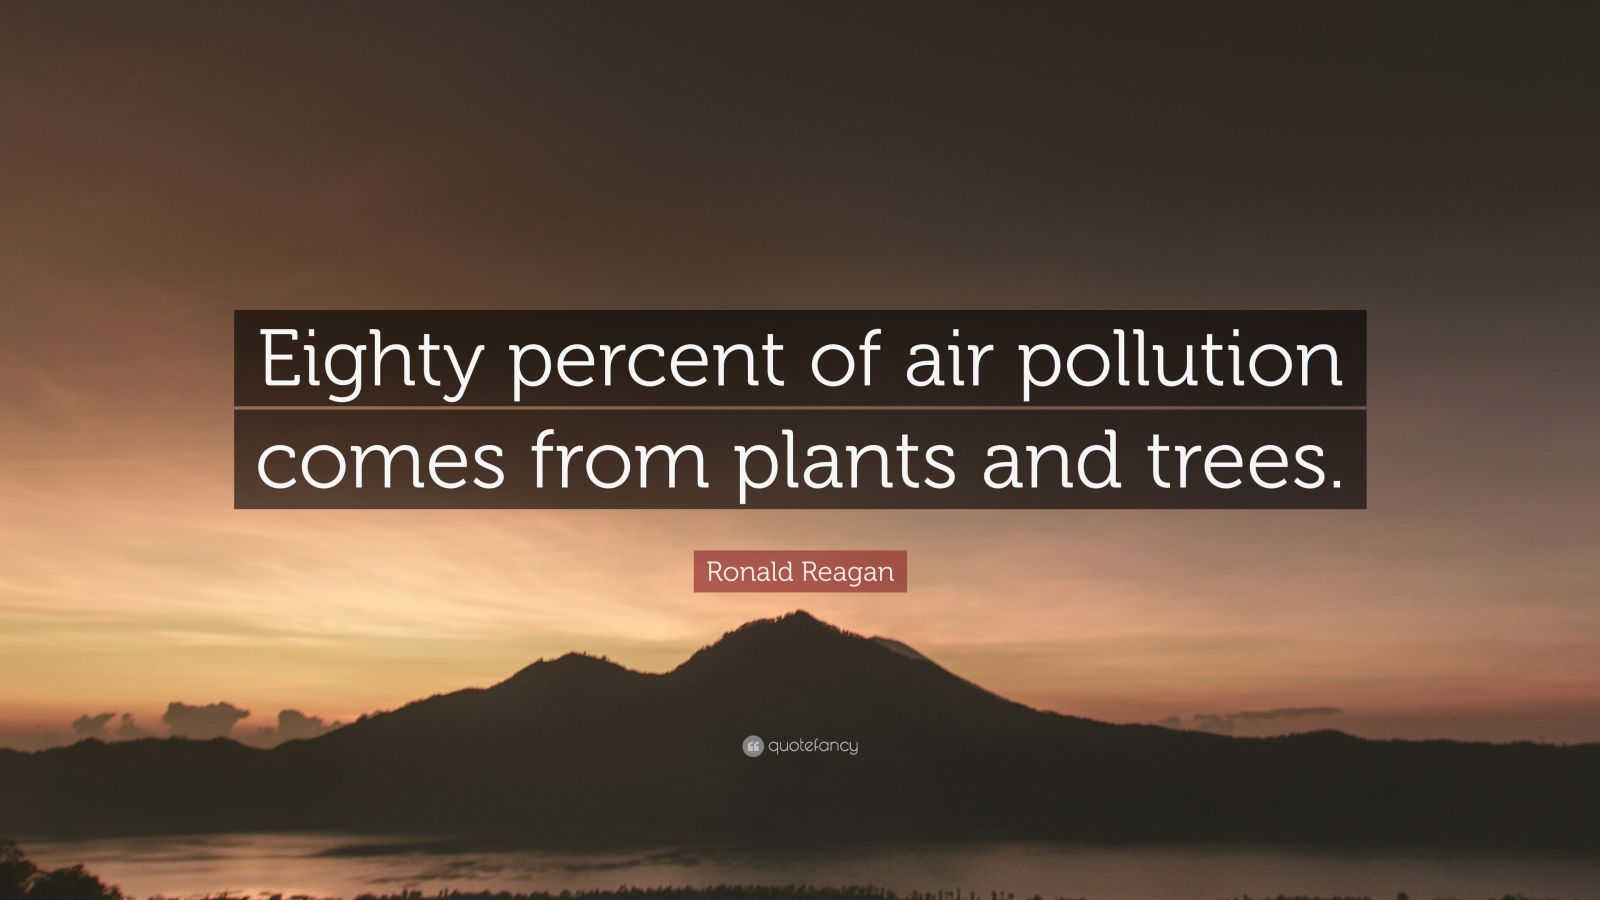 Ronald Reagan Quote: “Eighty percent of air pollution comes from plants